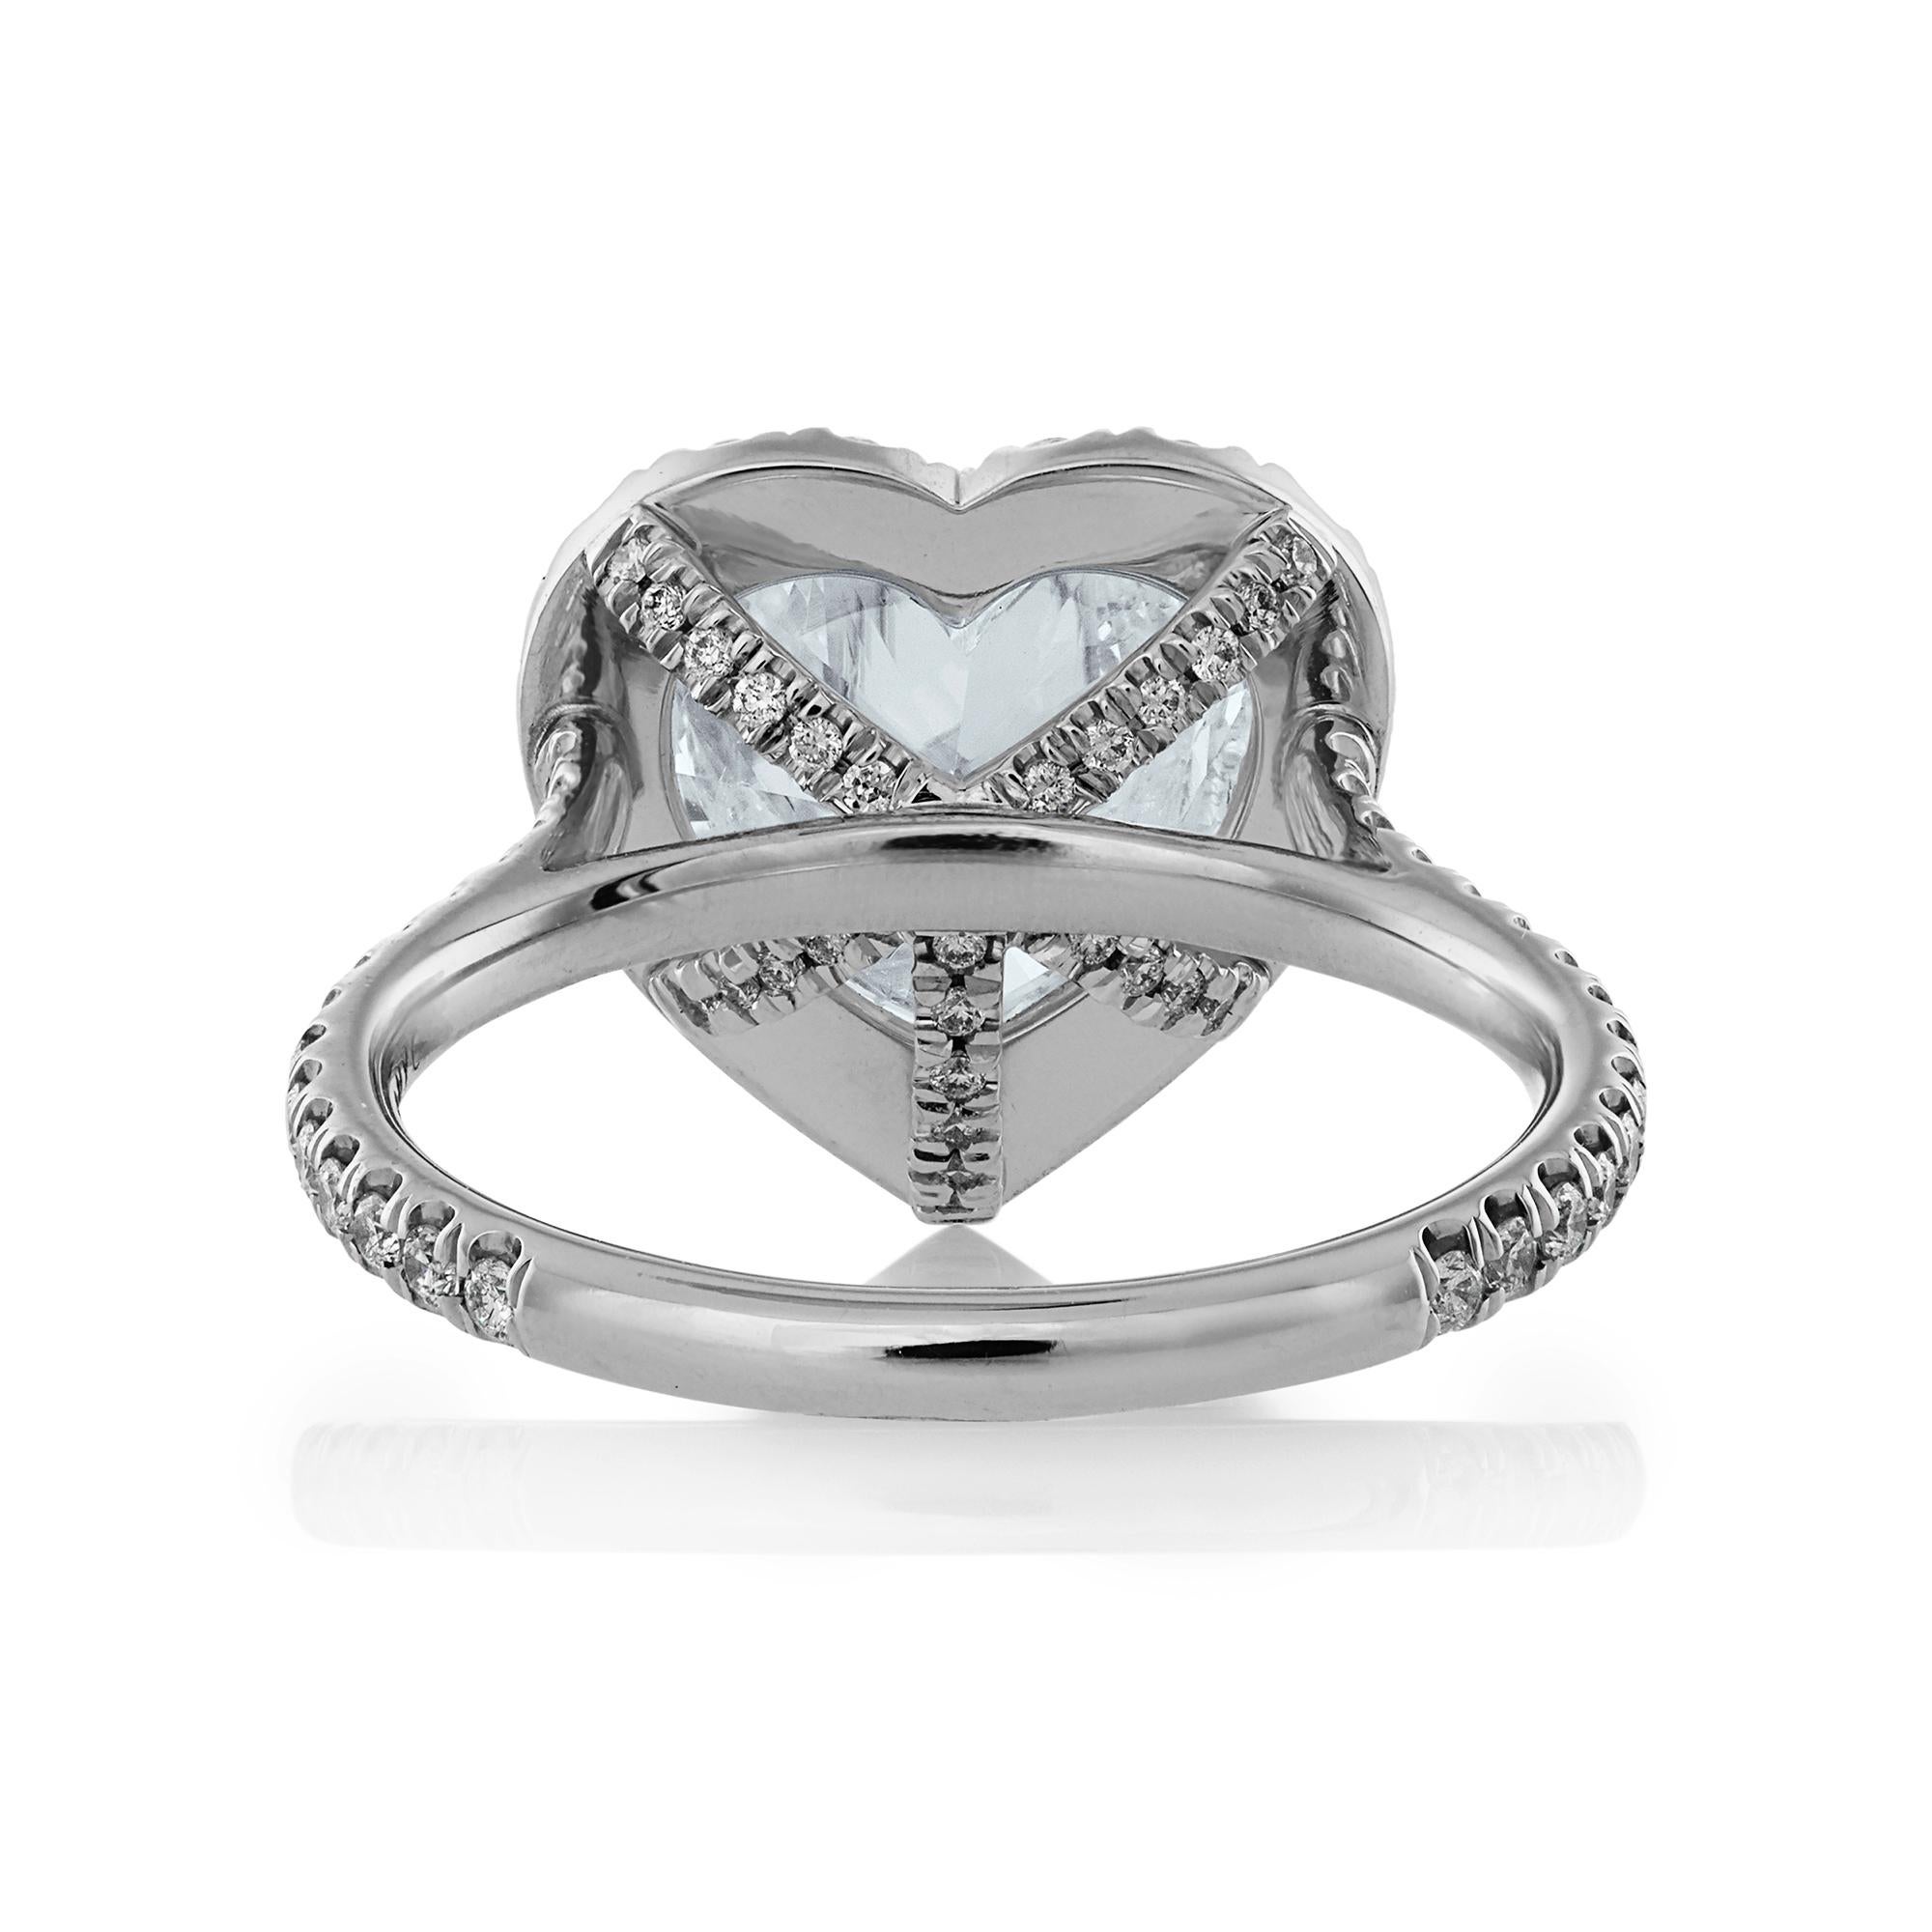 GIA shy 4.0ctw HEART Shaped Diamond Halo Estate Vintage Engagement Platinum Ring In Excellent Condition For Sale In New York, NY